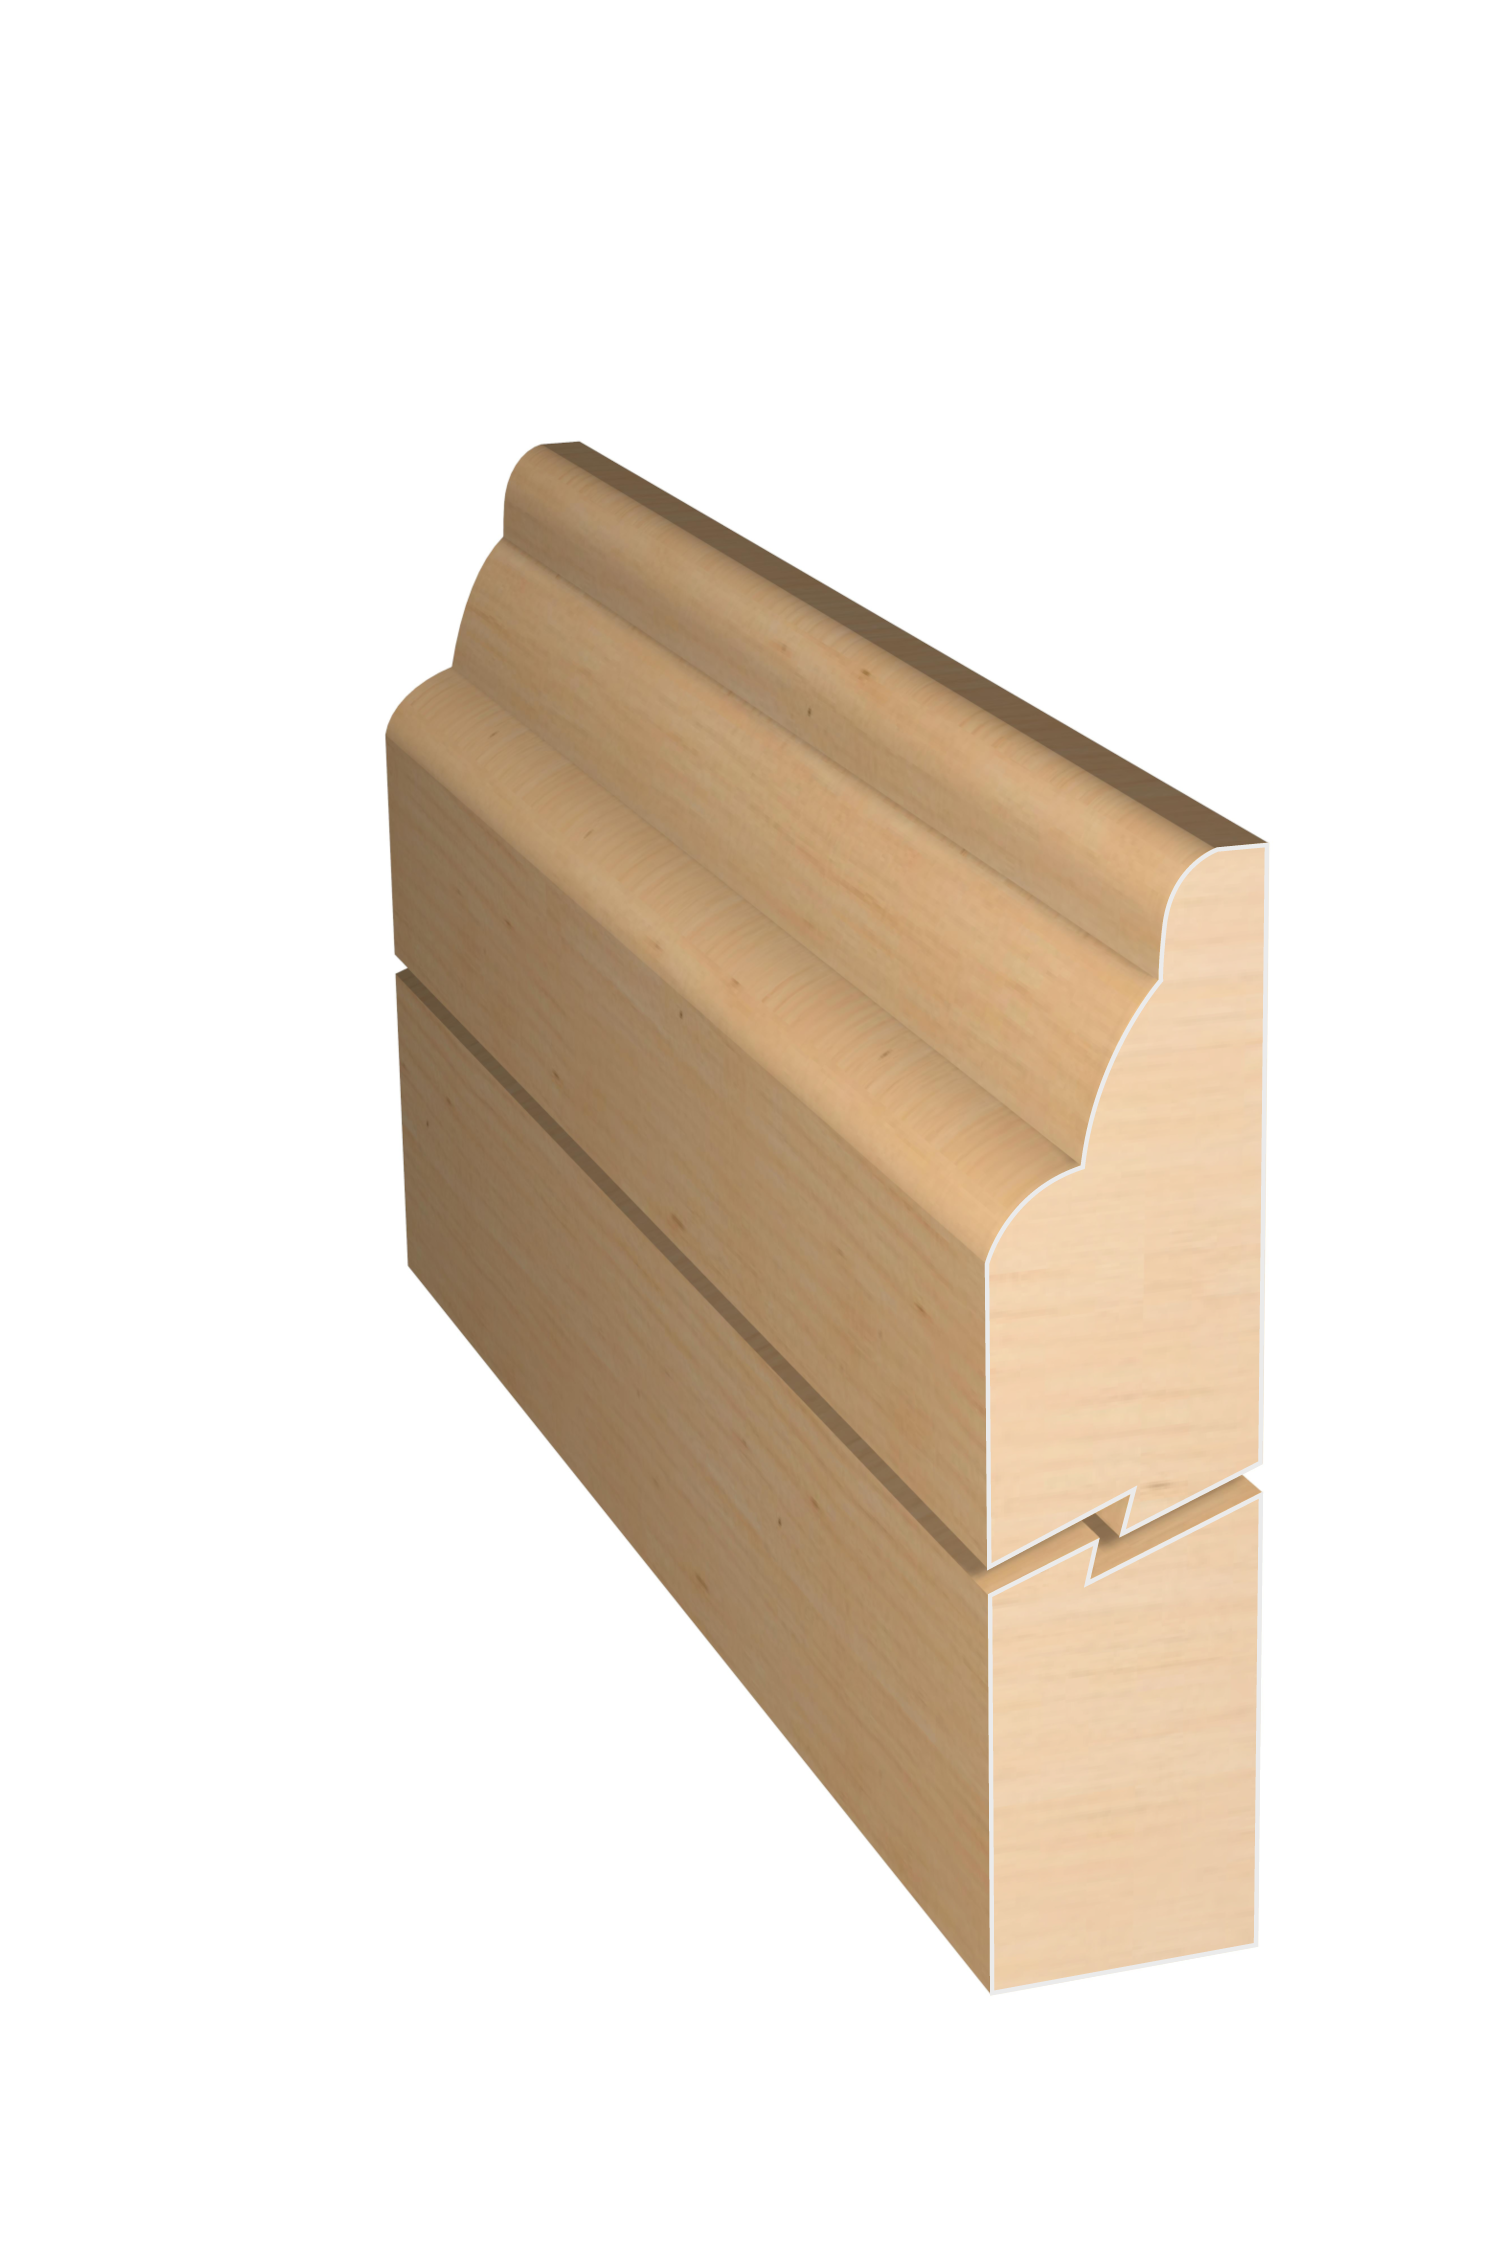 Three dimensional rendering of custom edge profile wood molding SKPL51 made by Public Lumber Company in Detroit.